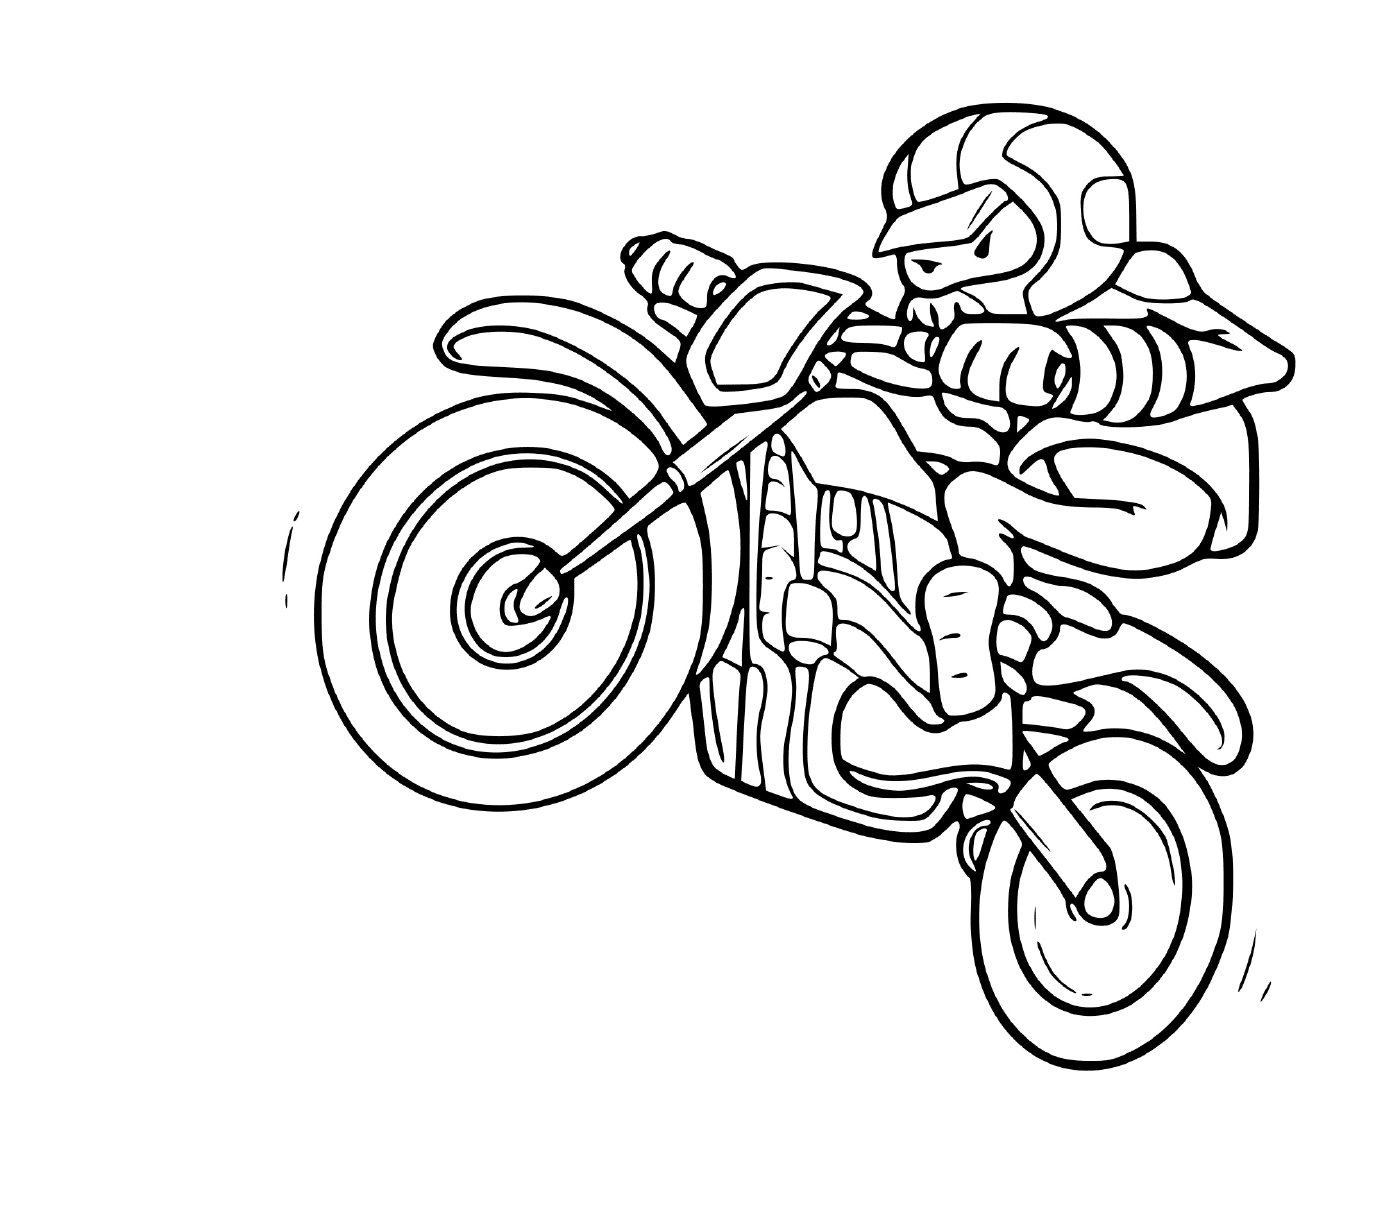  person on motorcycle cross 